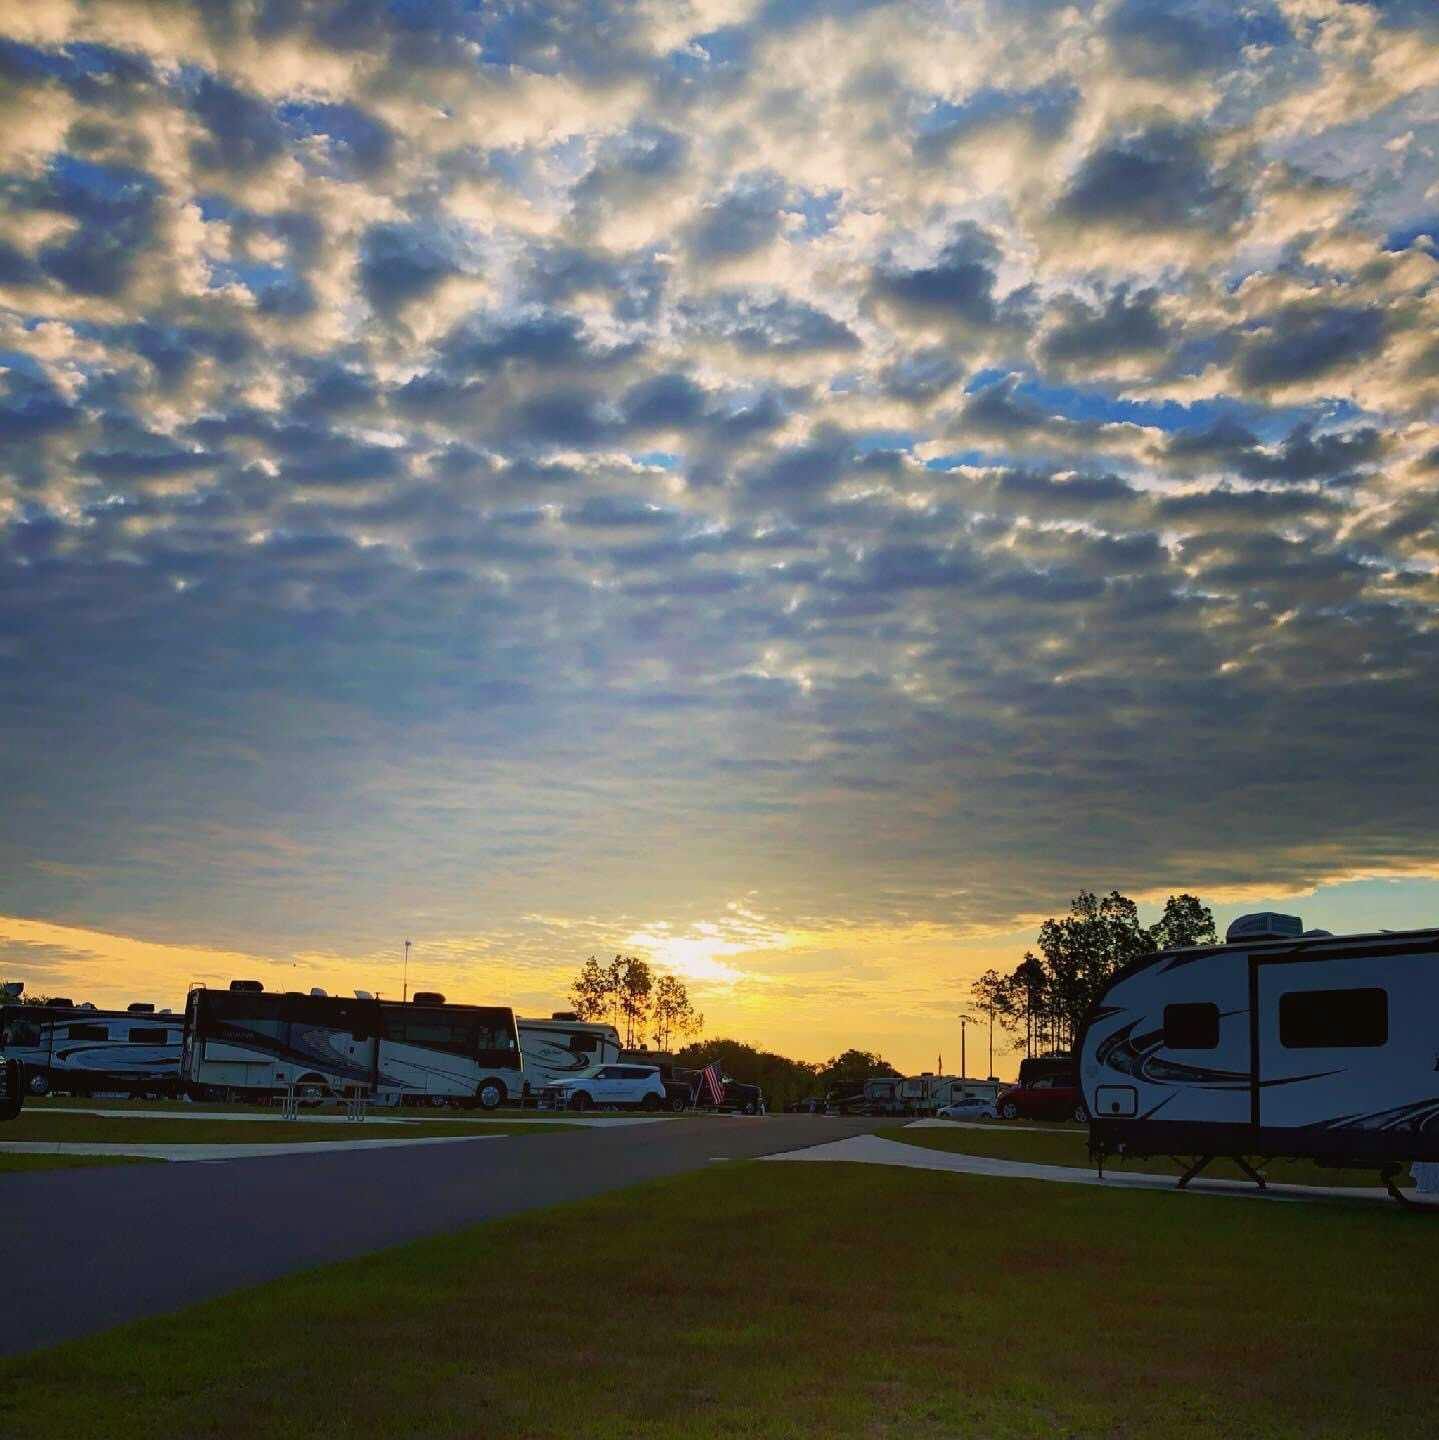 The sunset shines light on rippled clouds above an RV park.